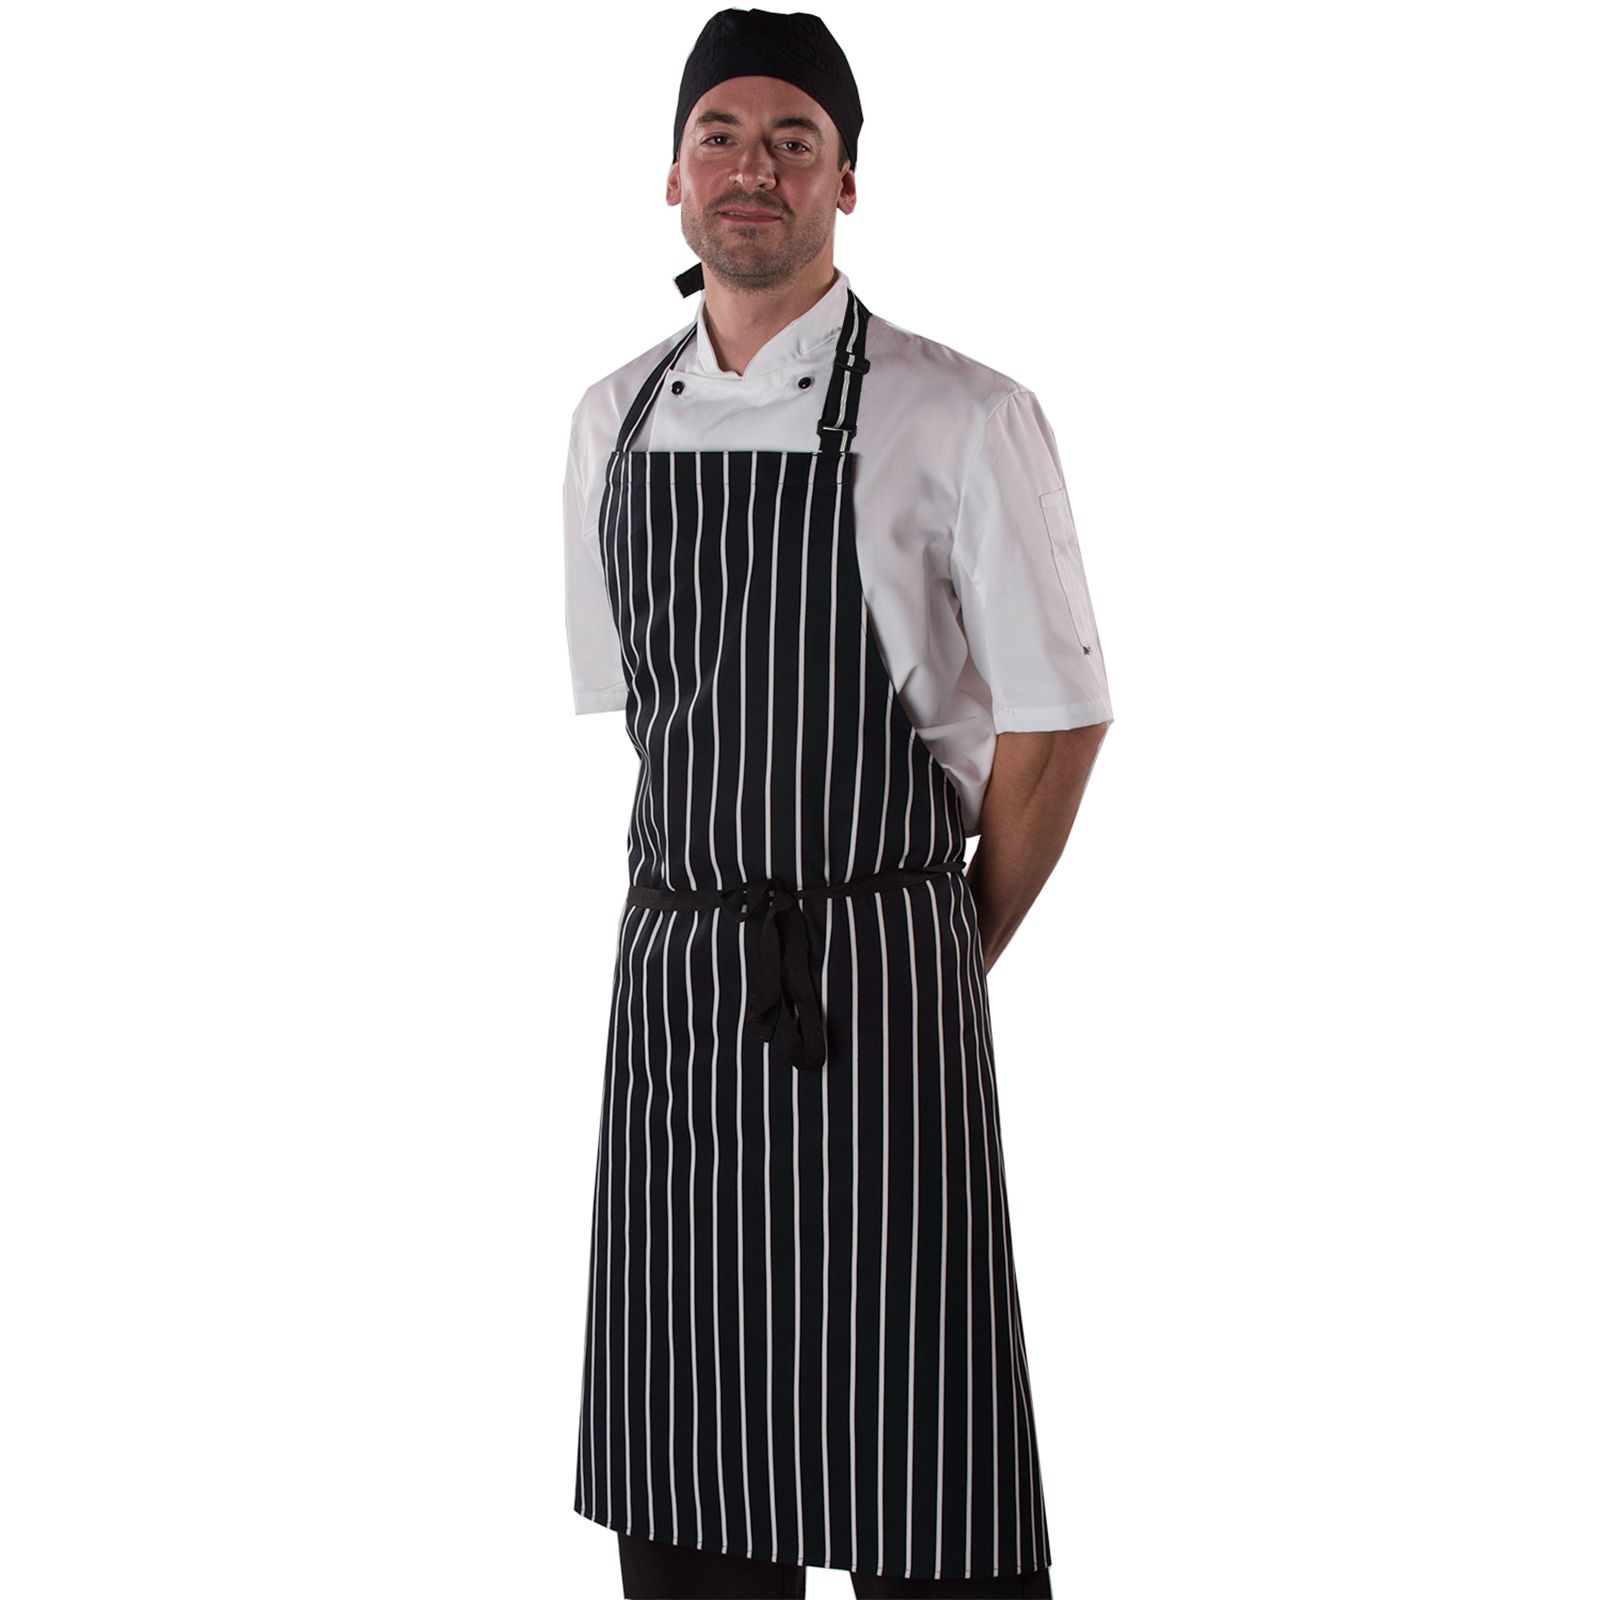 Striped apron with adjustable halter  (DP85)